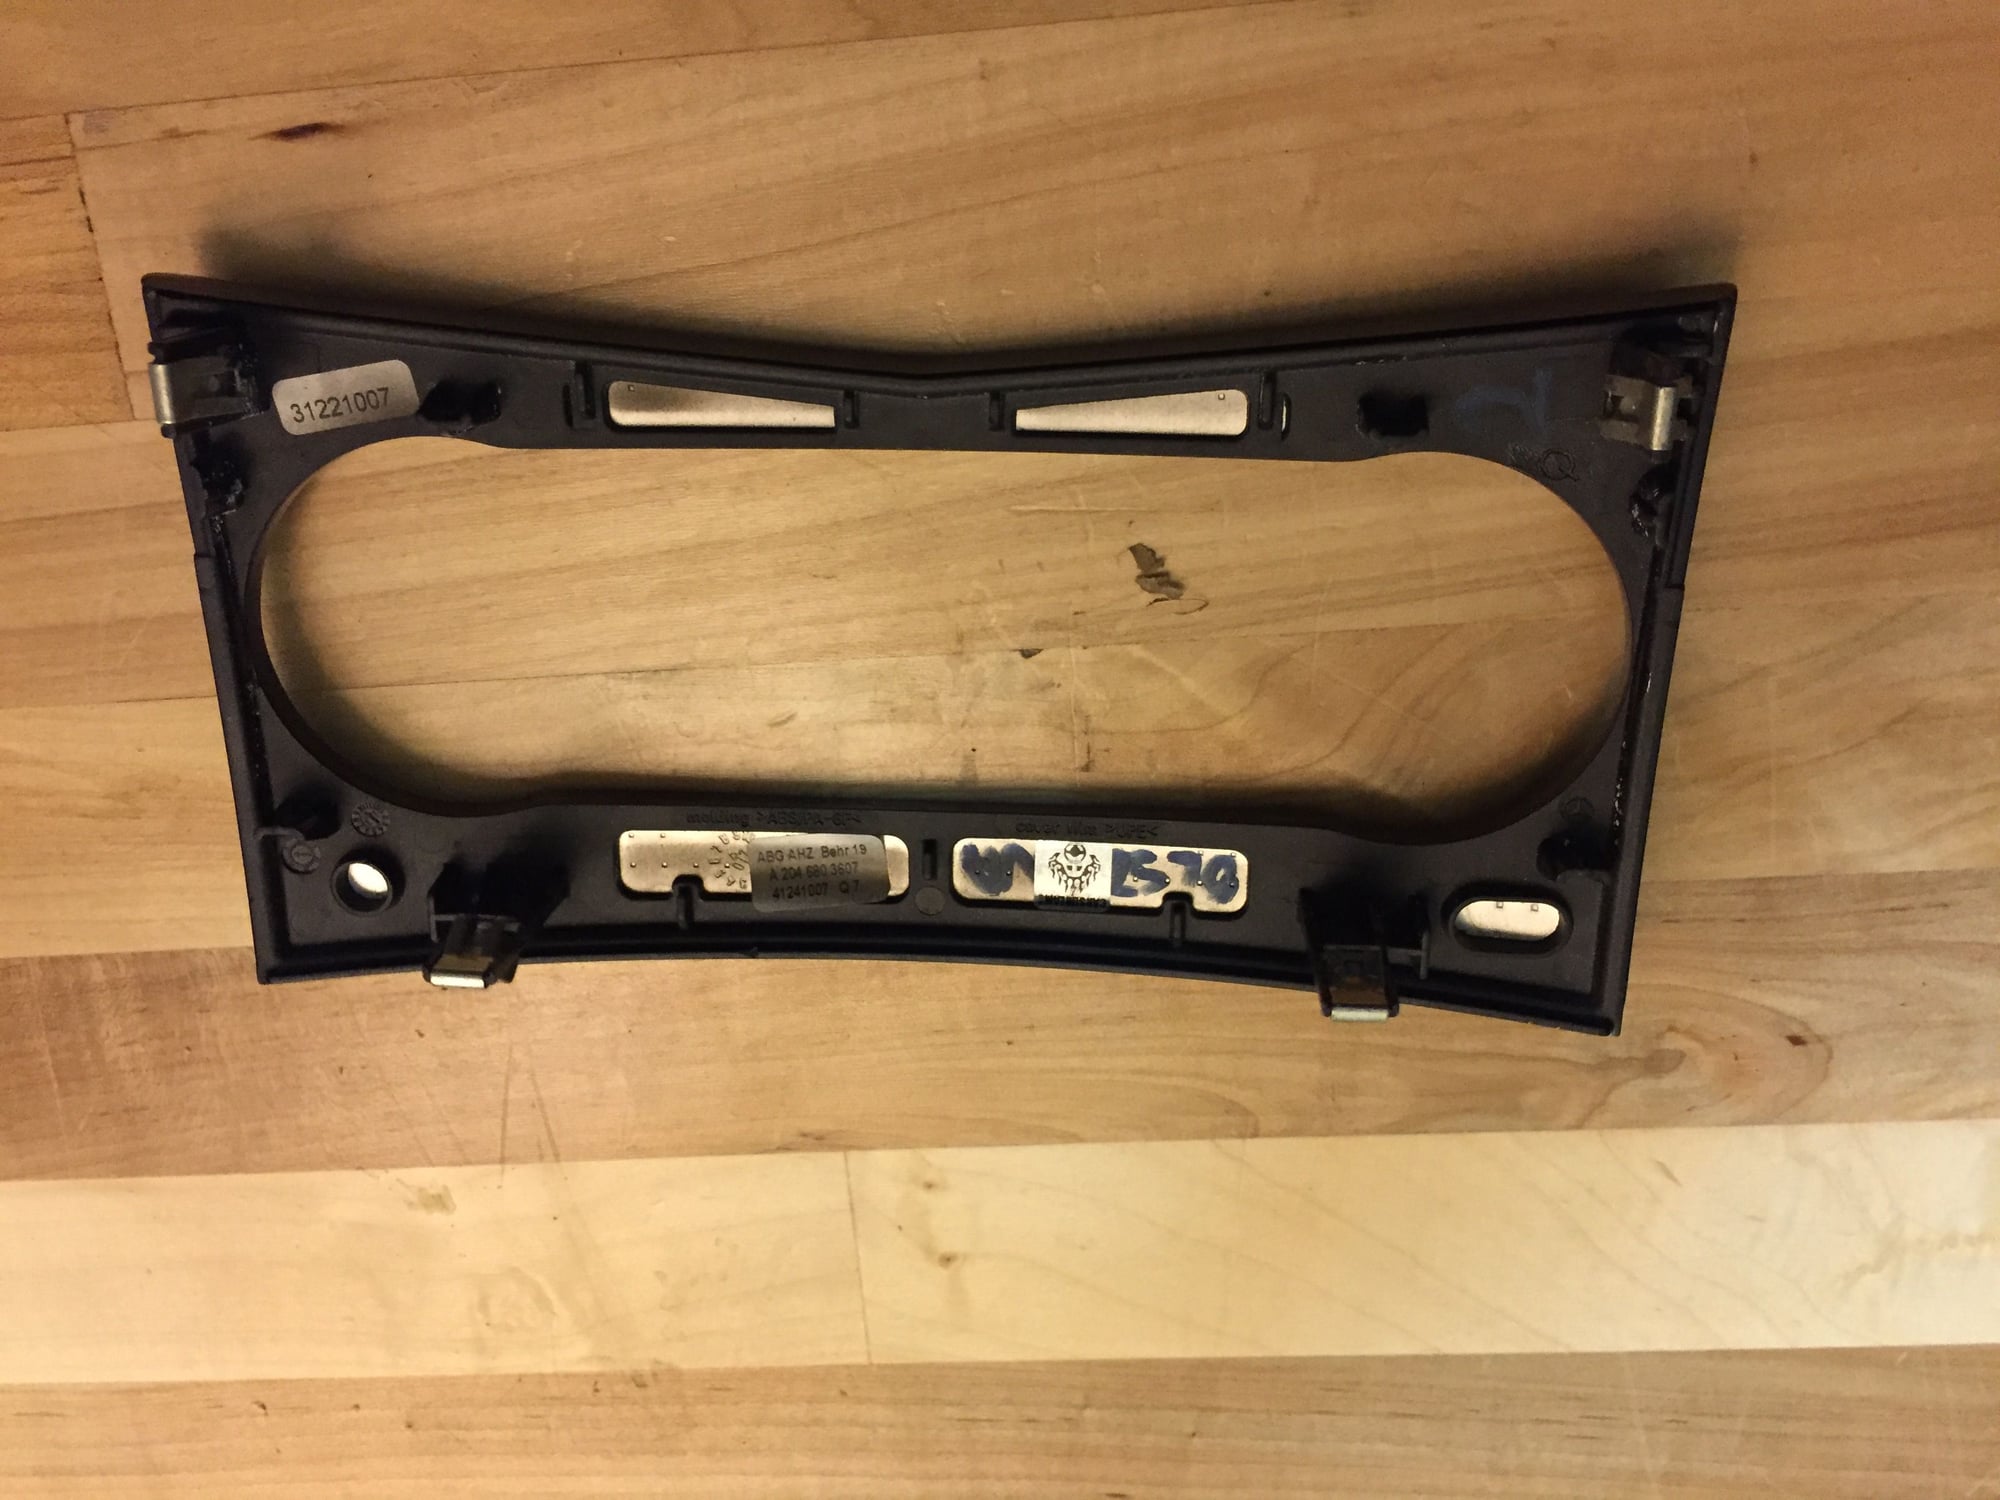 Interior/Upholstery - PFL C63 w 204 Carbon Fiber Climate control surround - Used - 2008 to 2012 Mercedes-Benz C63 AMG - Houston, TX 77056, United States